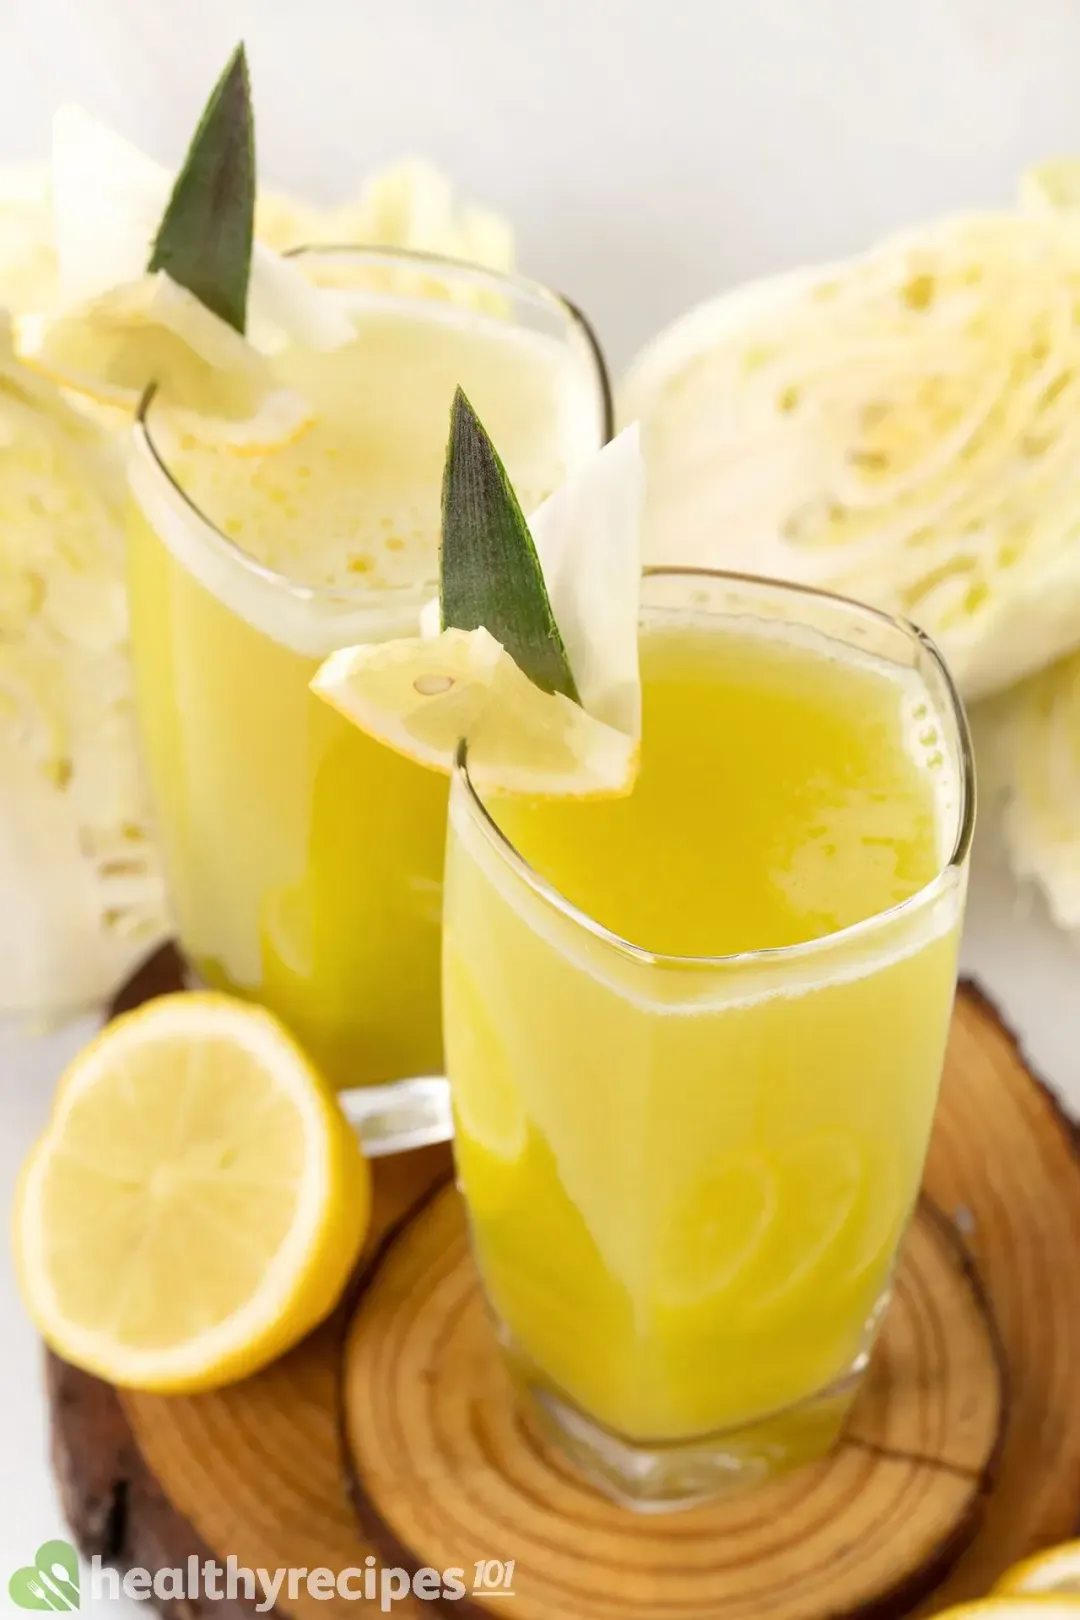 Two glasses of yellow-green cabbage drink garnished with lemon wedges, and put next to half a lemon